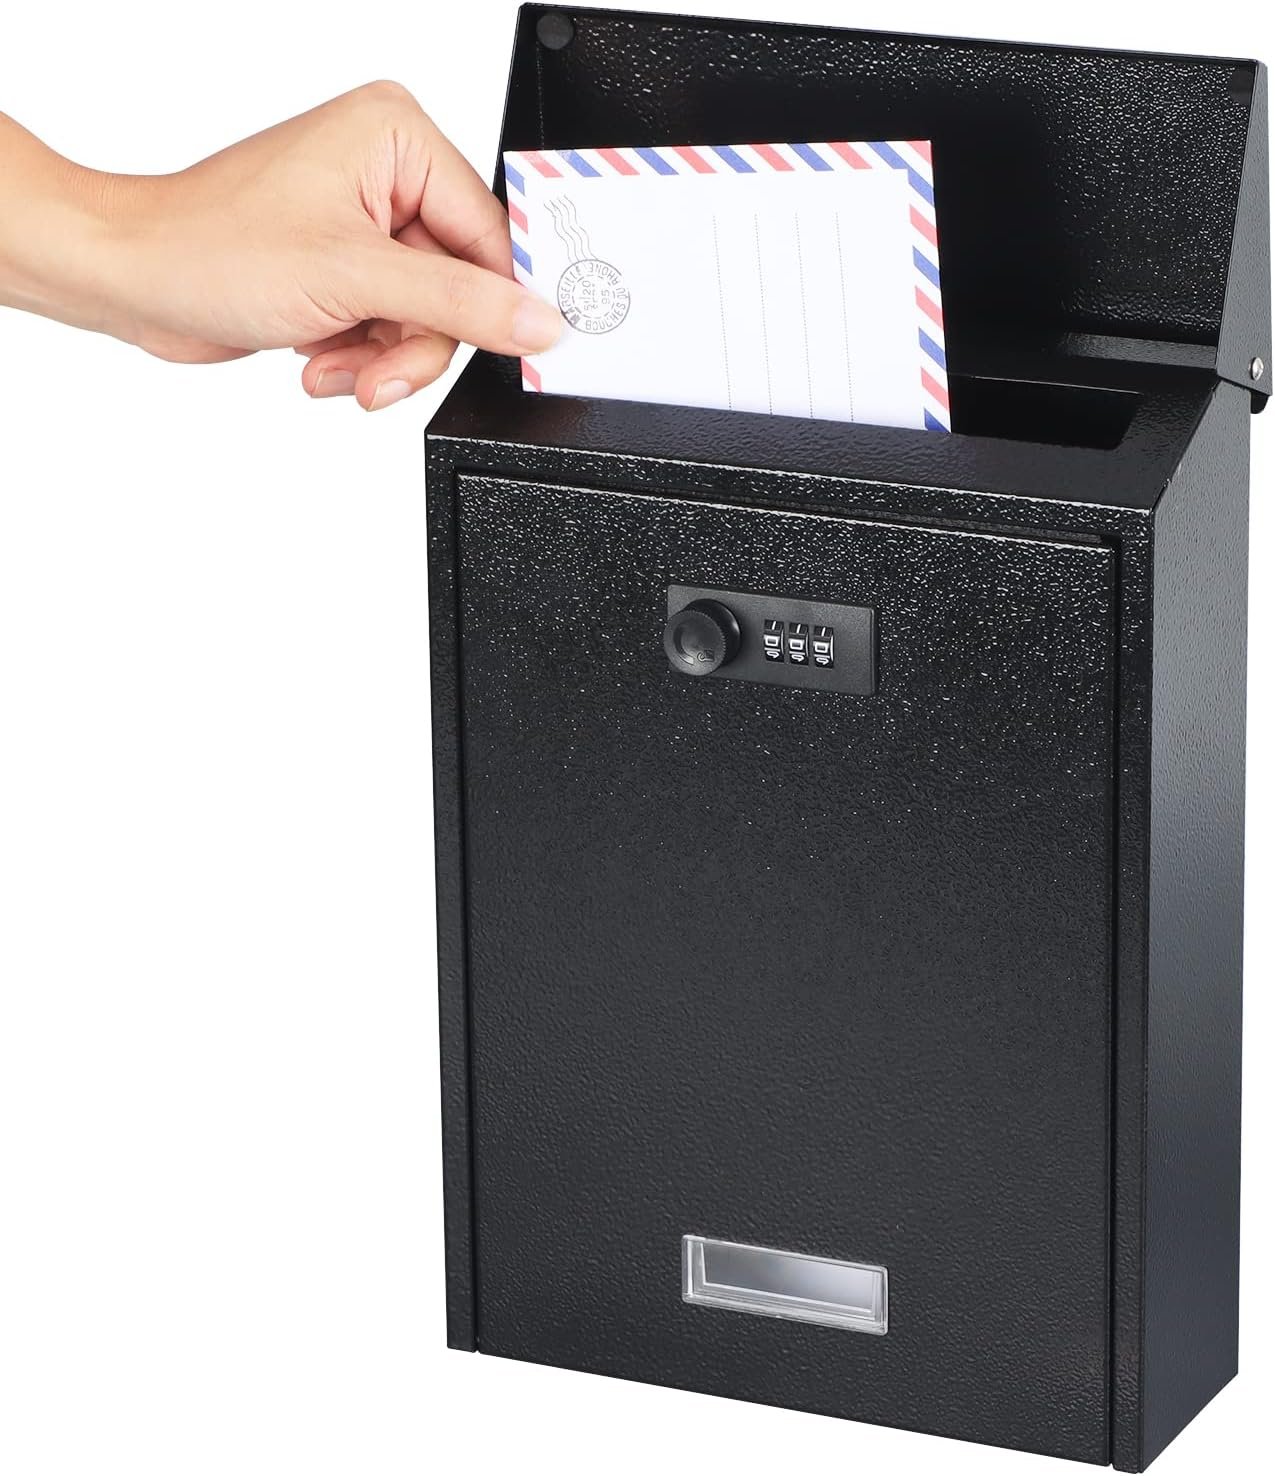 xydled Mail Boxes Review